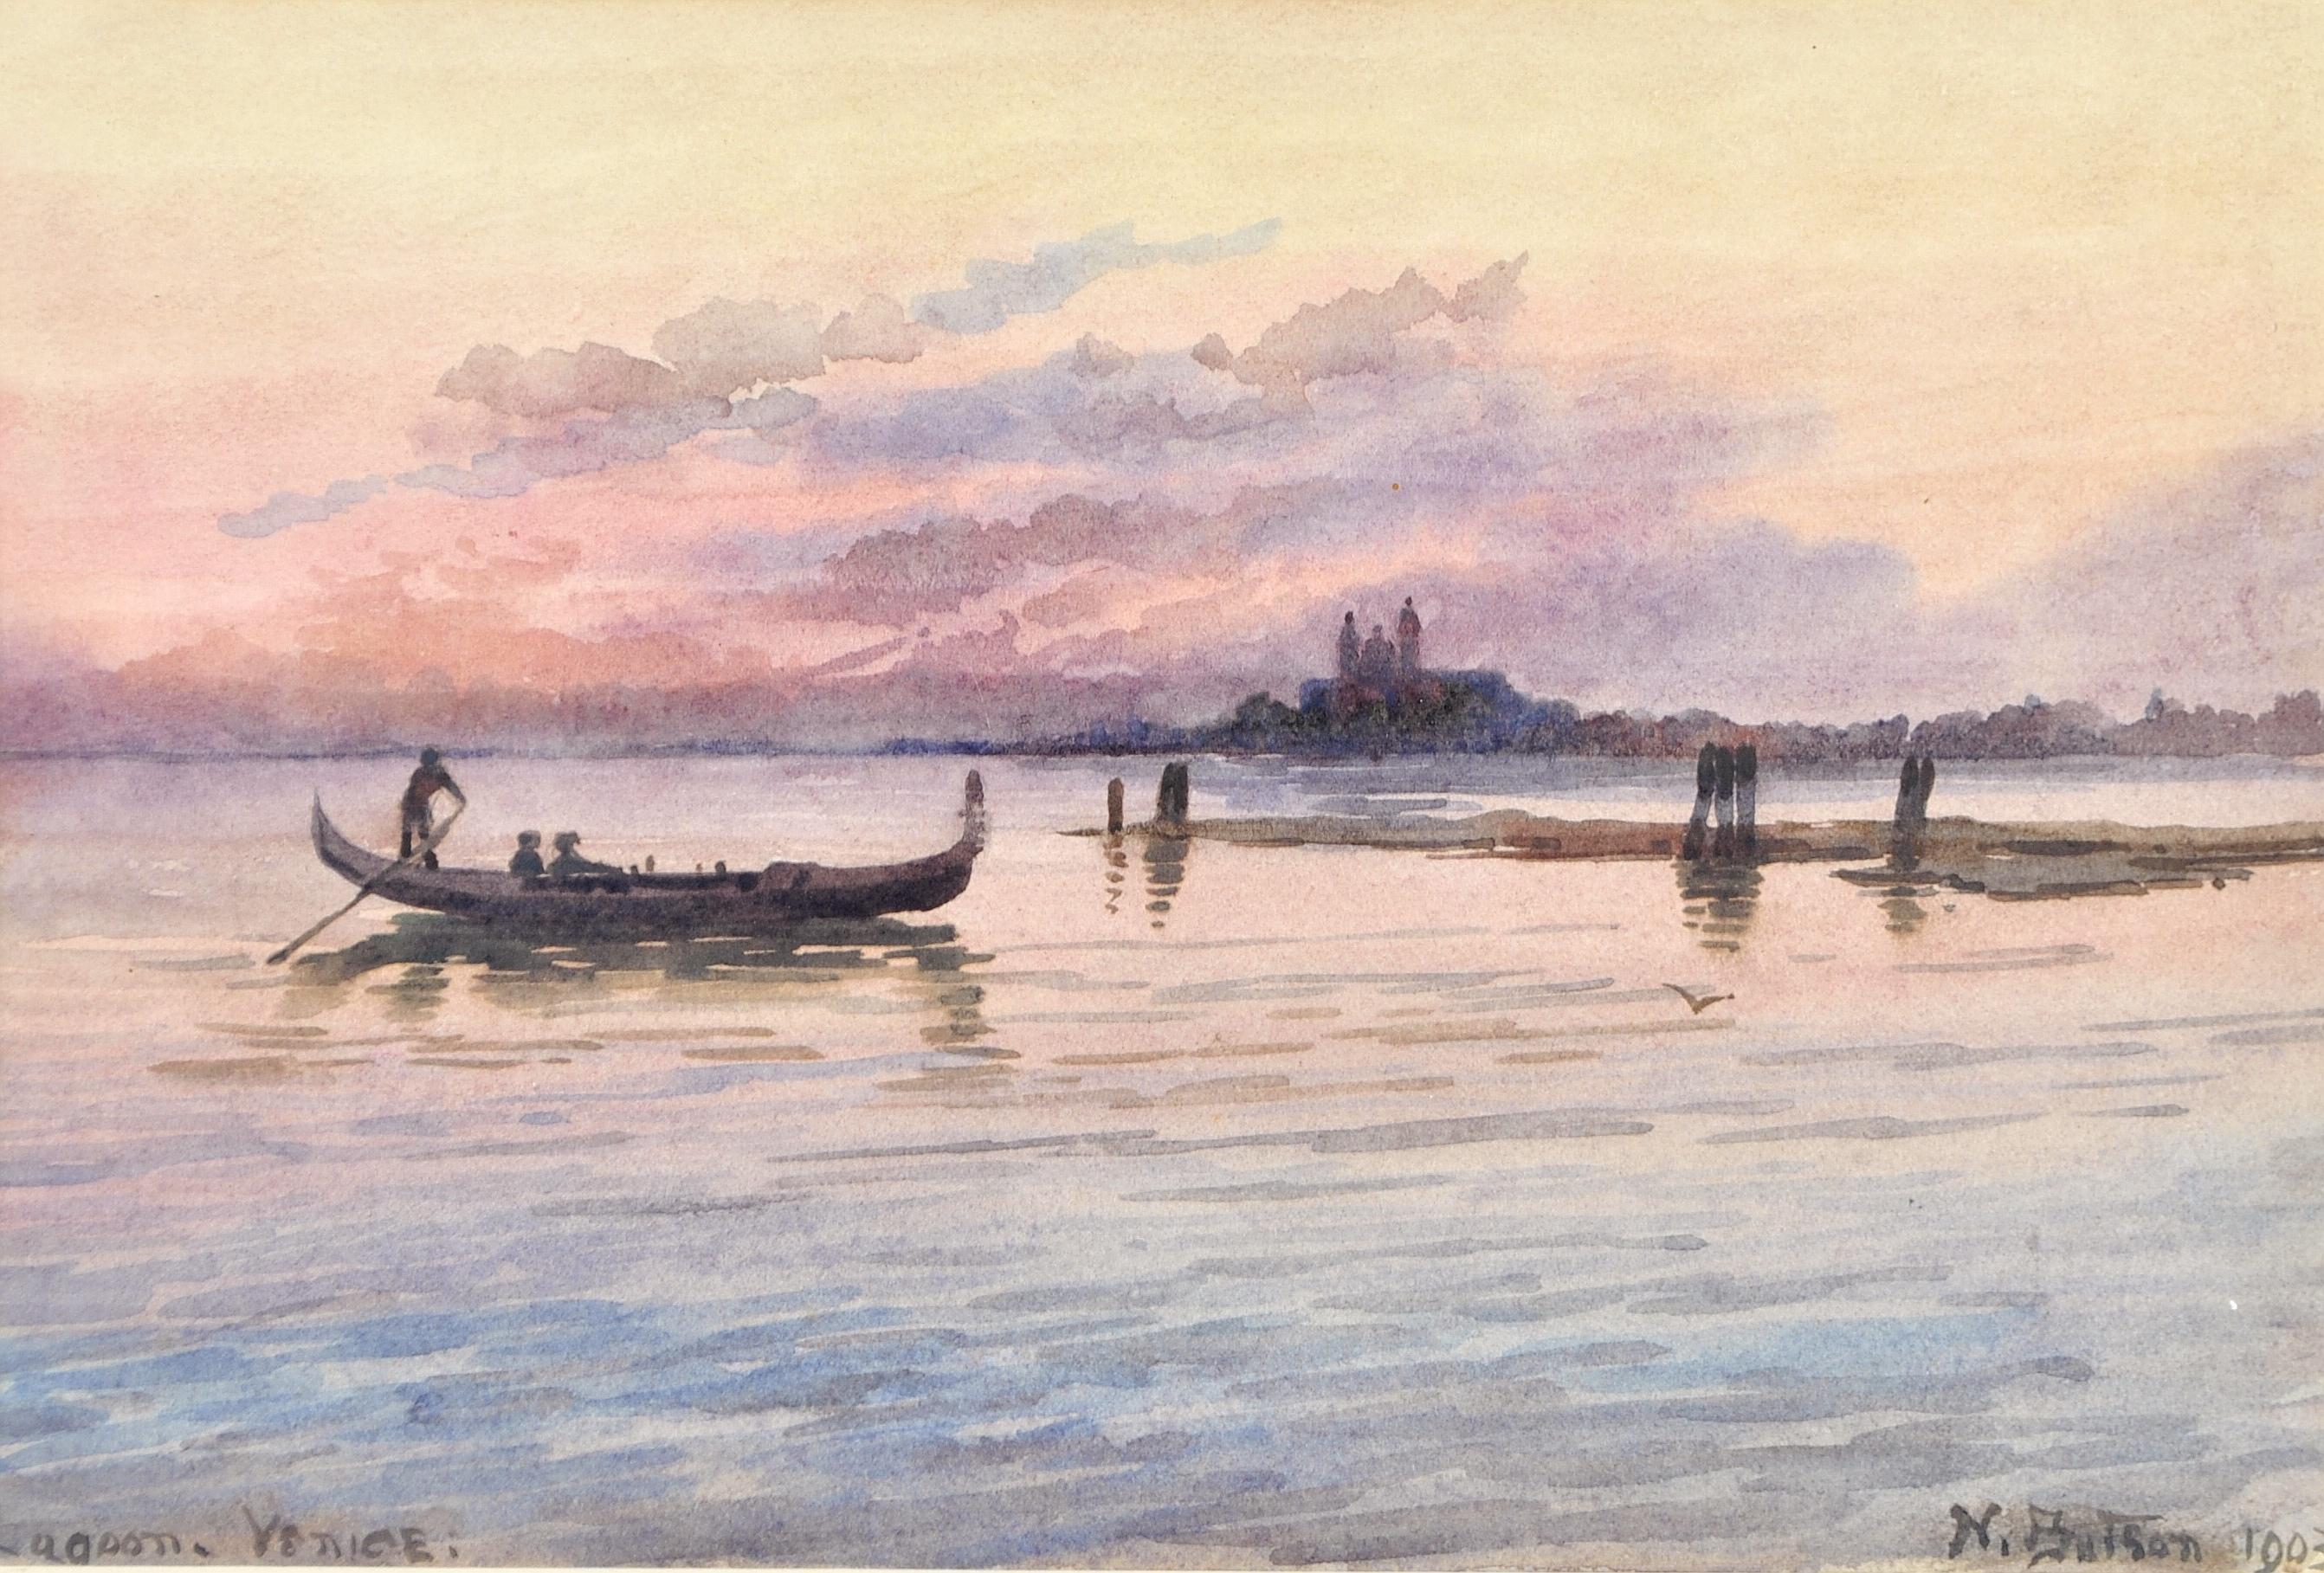 Venice Lagoon - Fine Antique English Italy Watercolor Sunset Landscape Painting - Art by Nora Butson